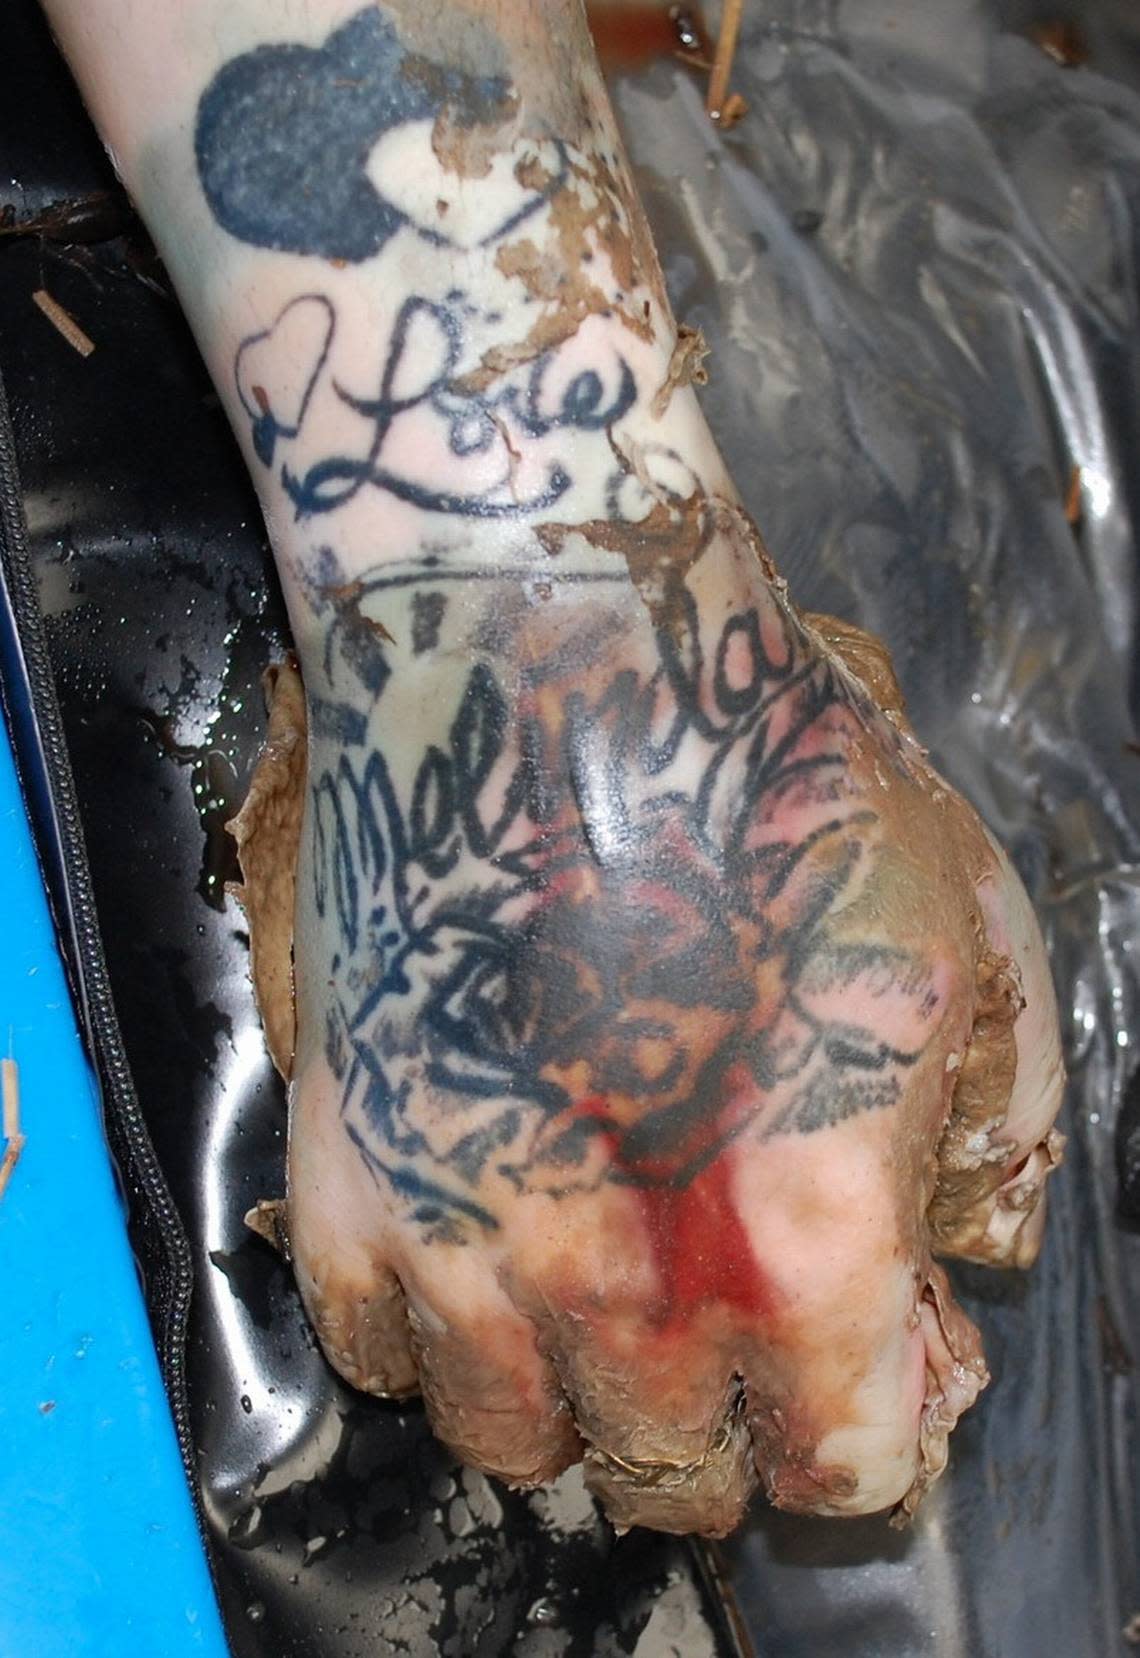 The person’s right hand tattooed with “love Melinda.”